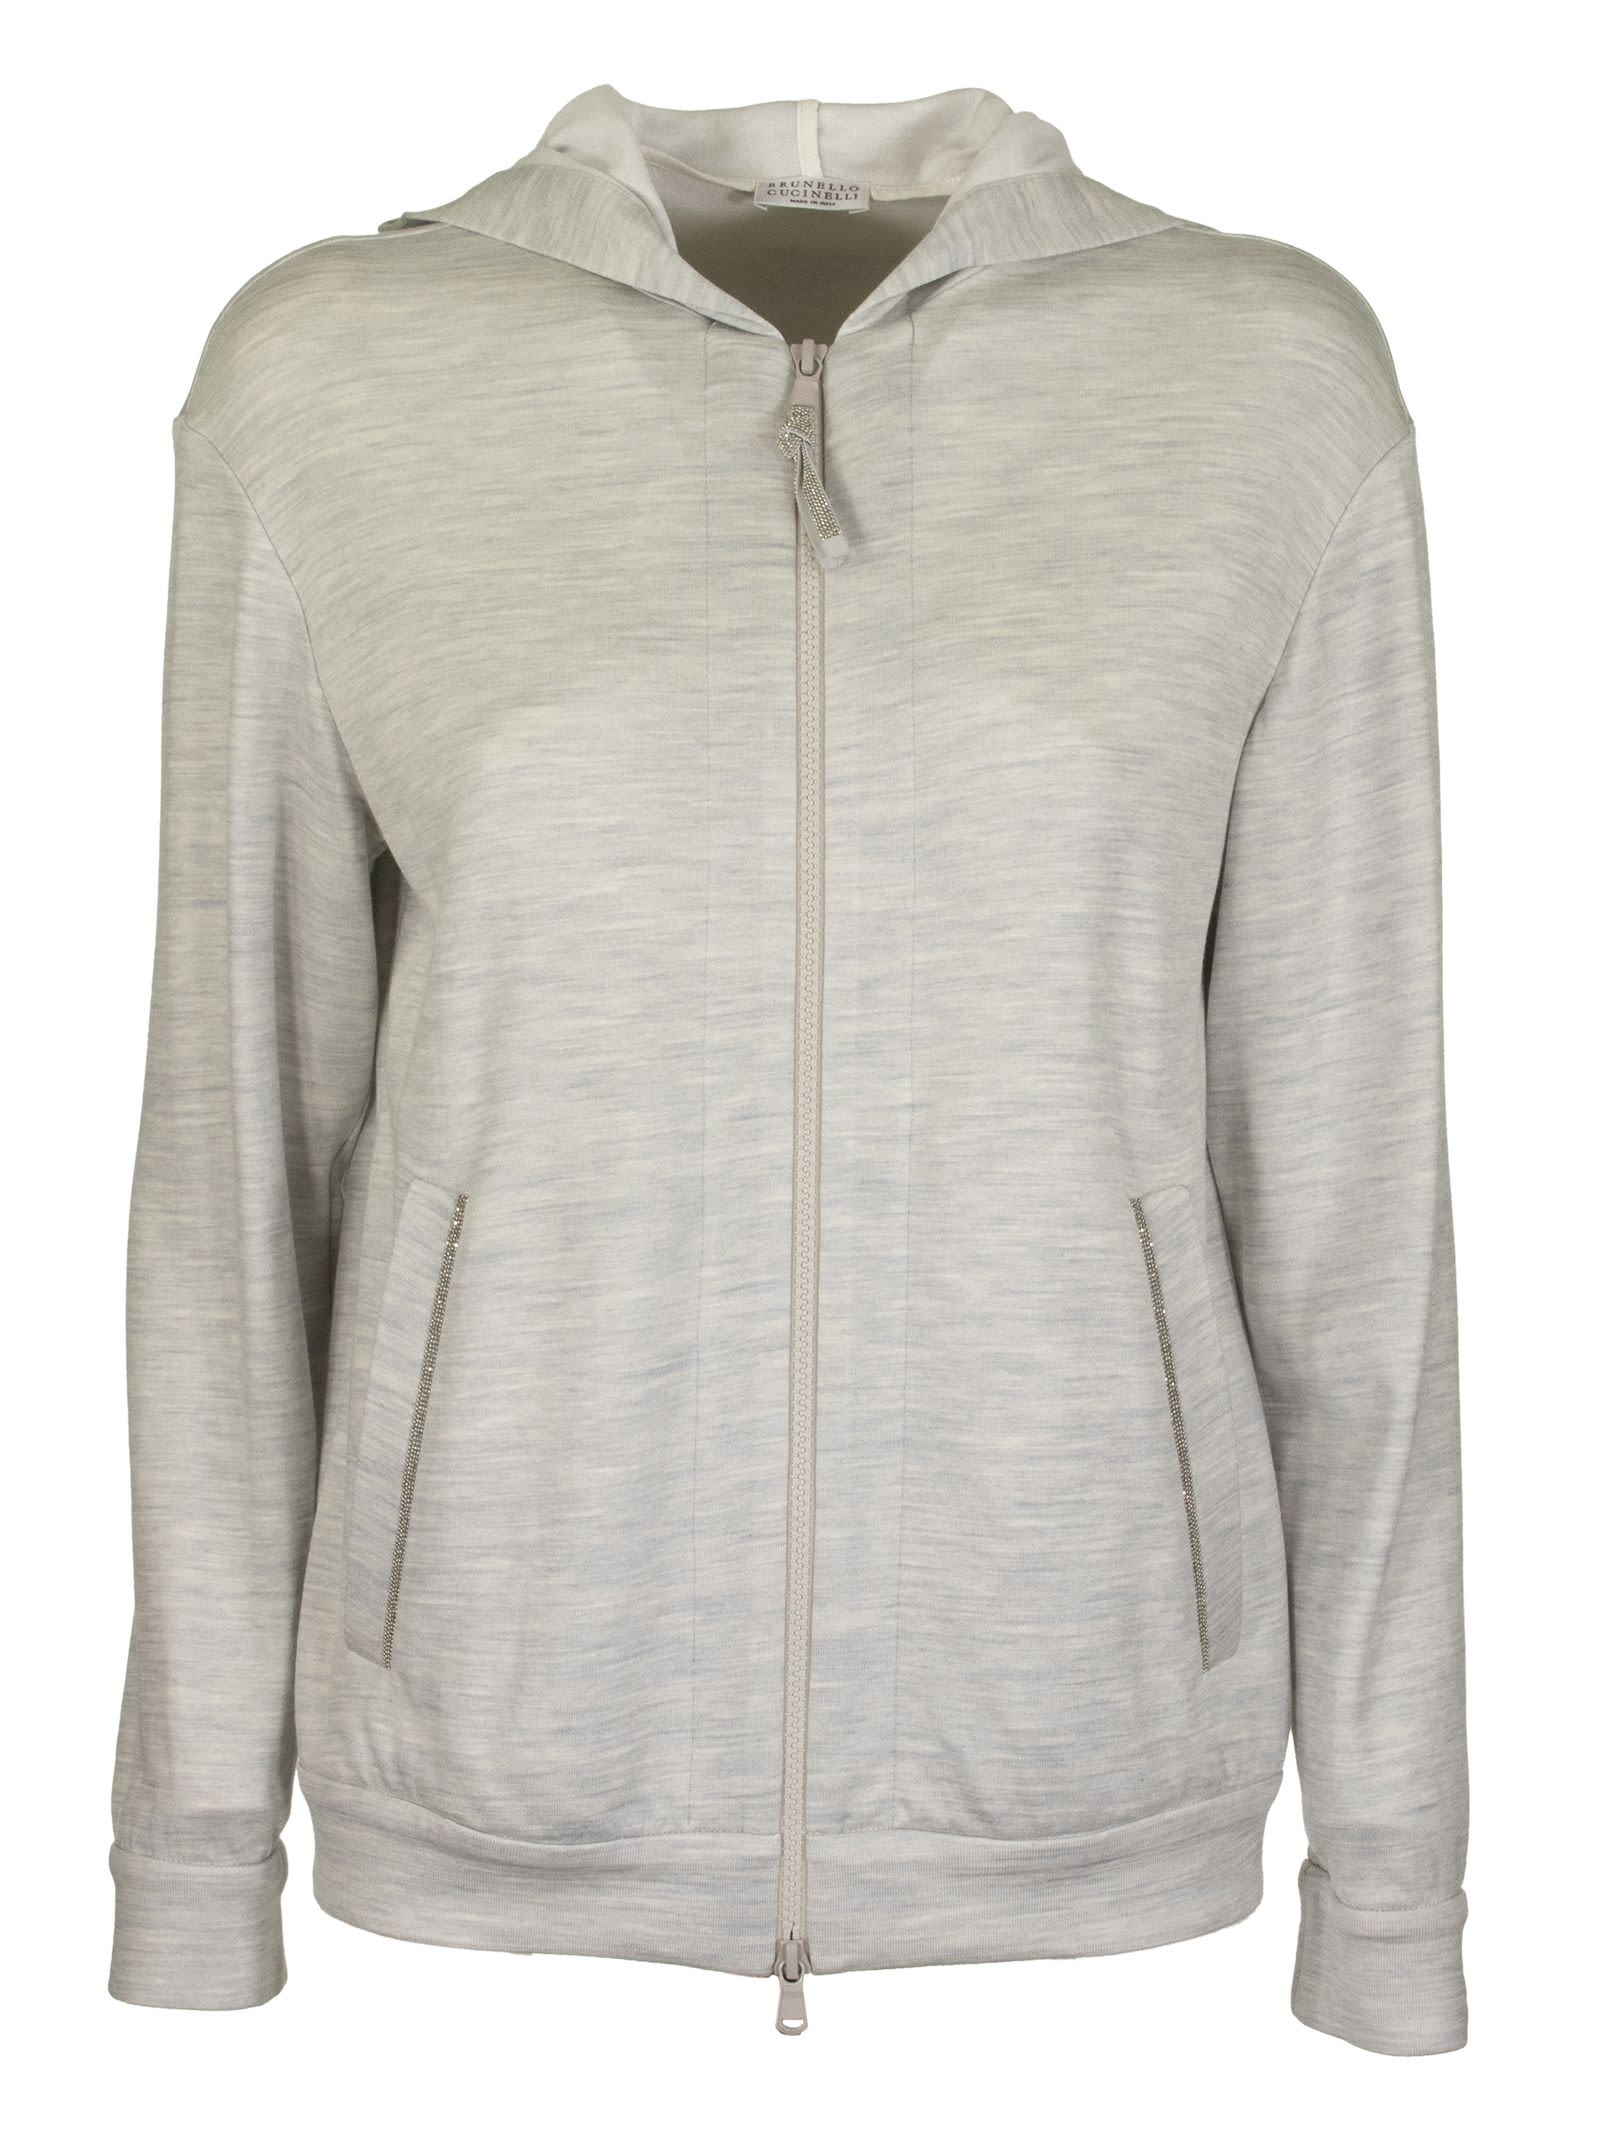 BRUNELLO CUCINELLI LIGHT COTTON AND SILK TERRY SWEATSHIRT WITH JEWELS,11310794